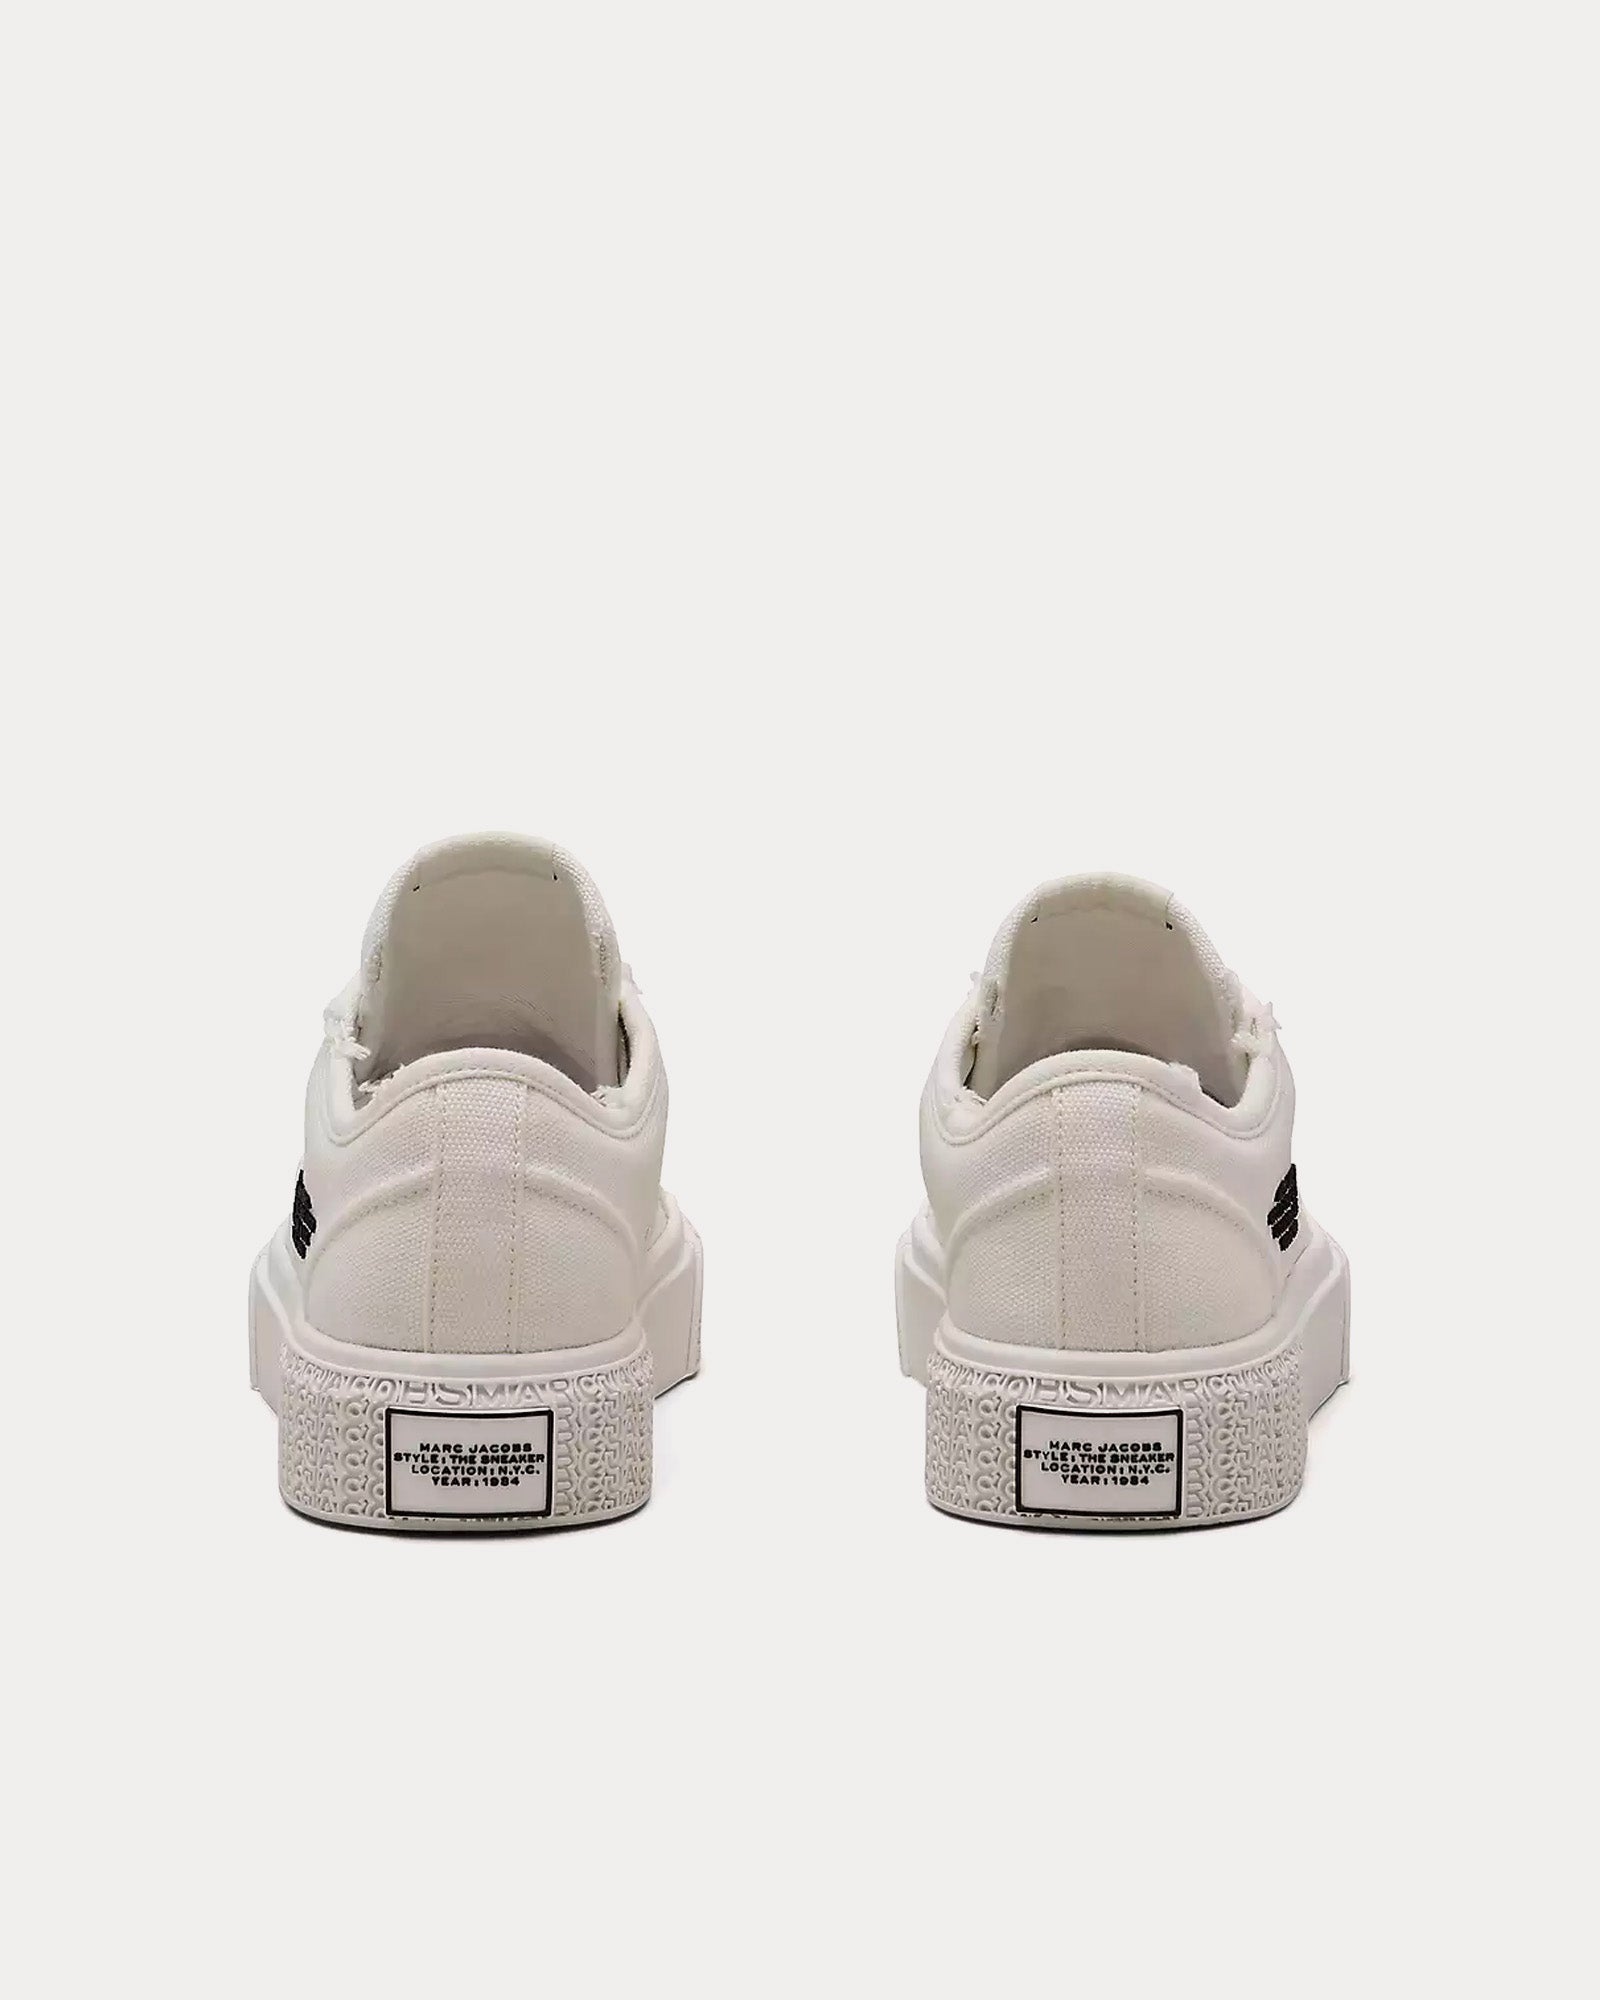 Marc Jacobs - The Sneaker White Low Top Sneakers